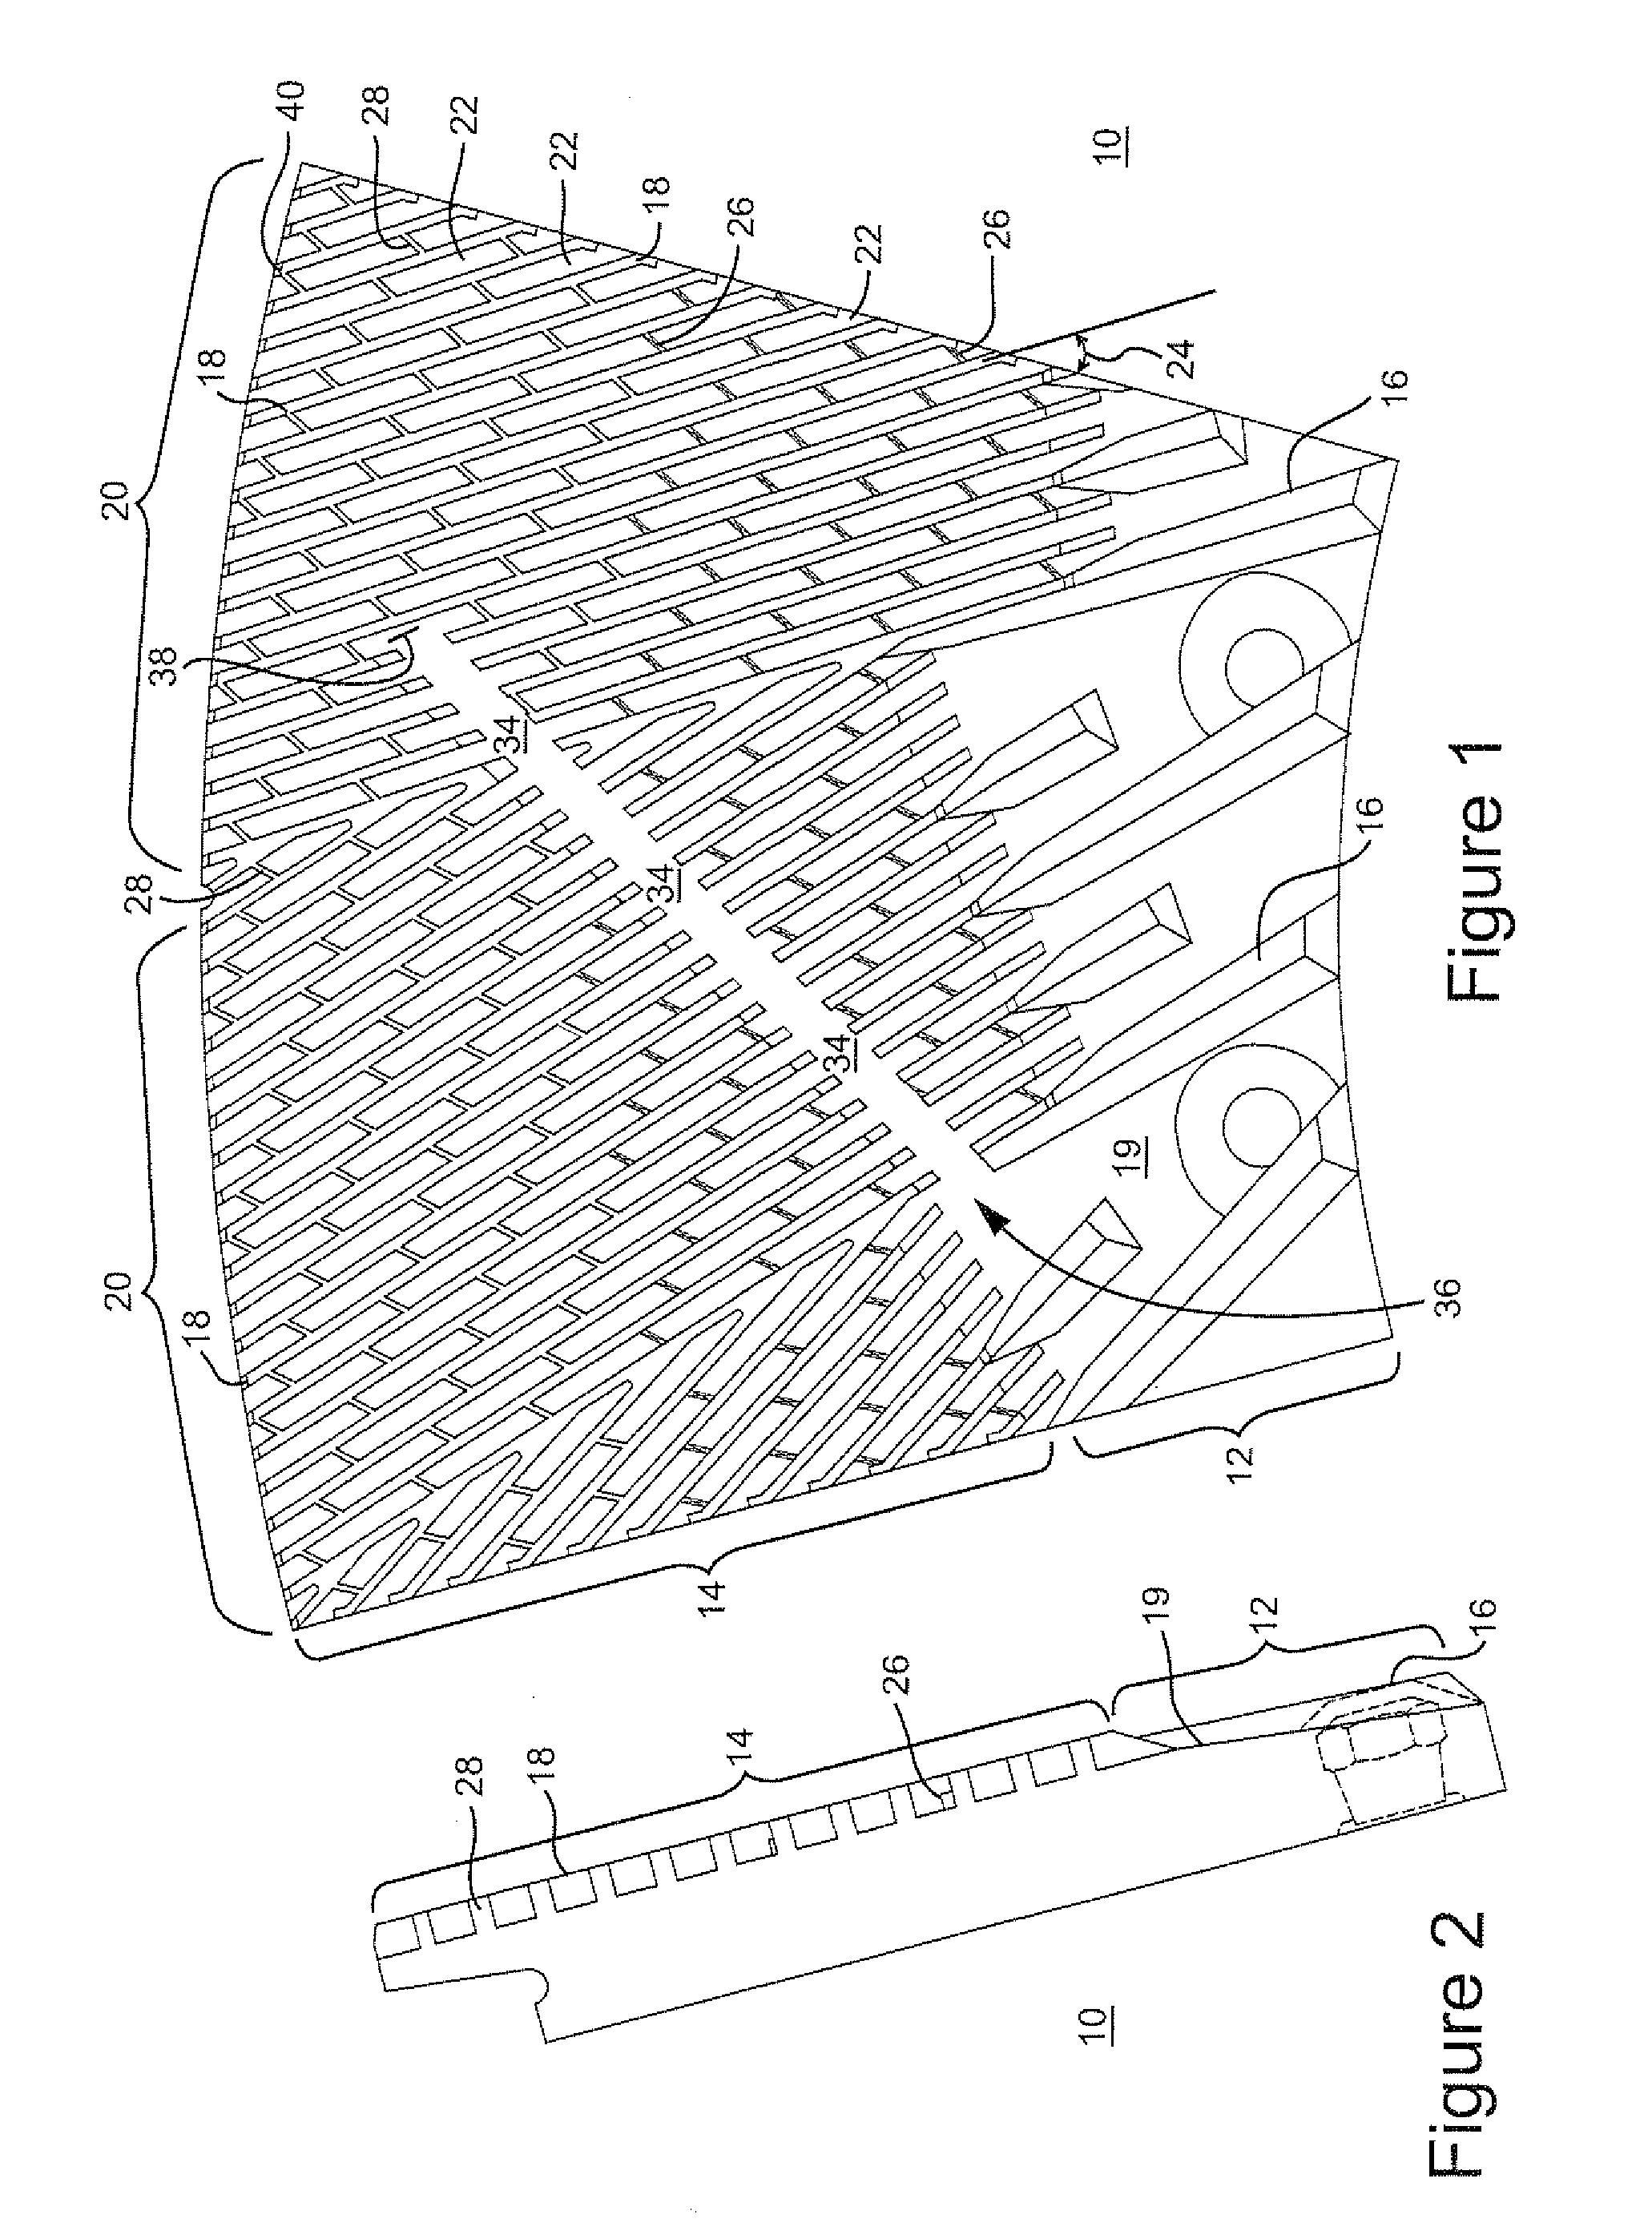 Refiner plates having steam channels and method for extracting backflow steam from a disk refiner